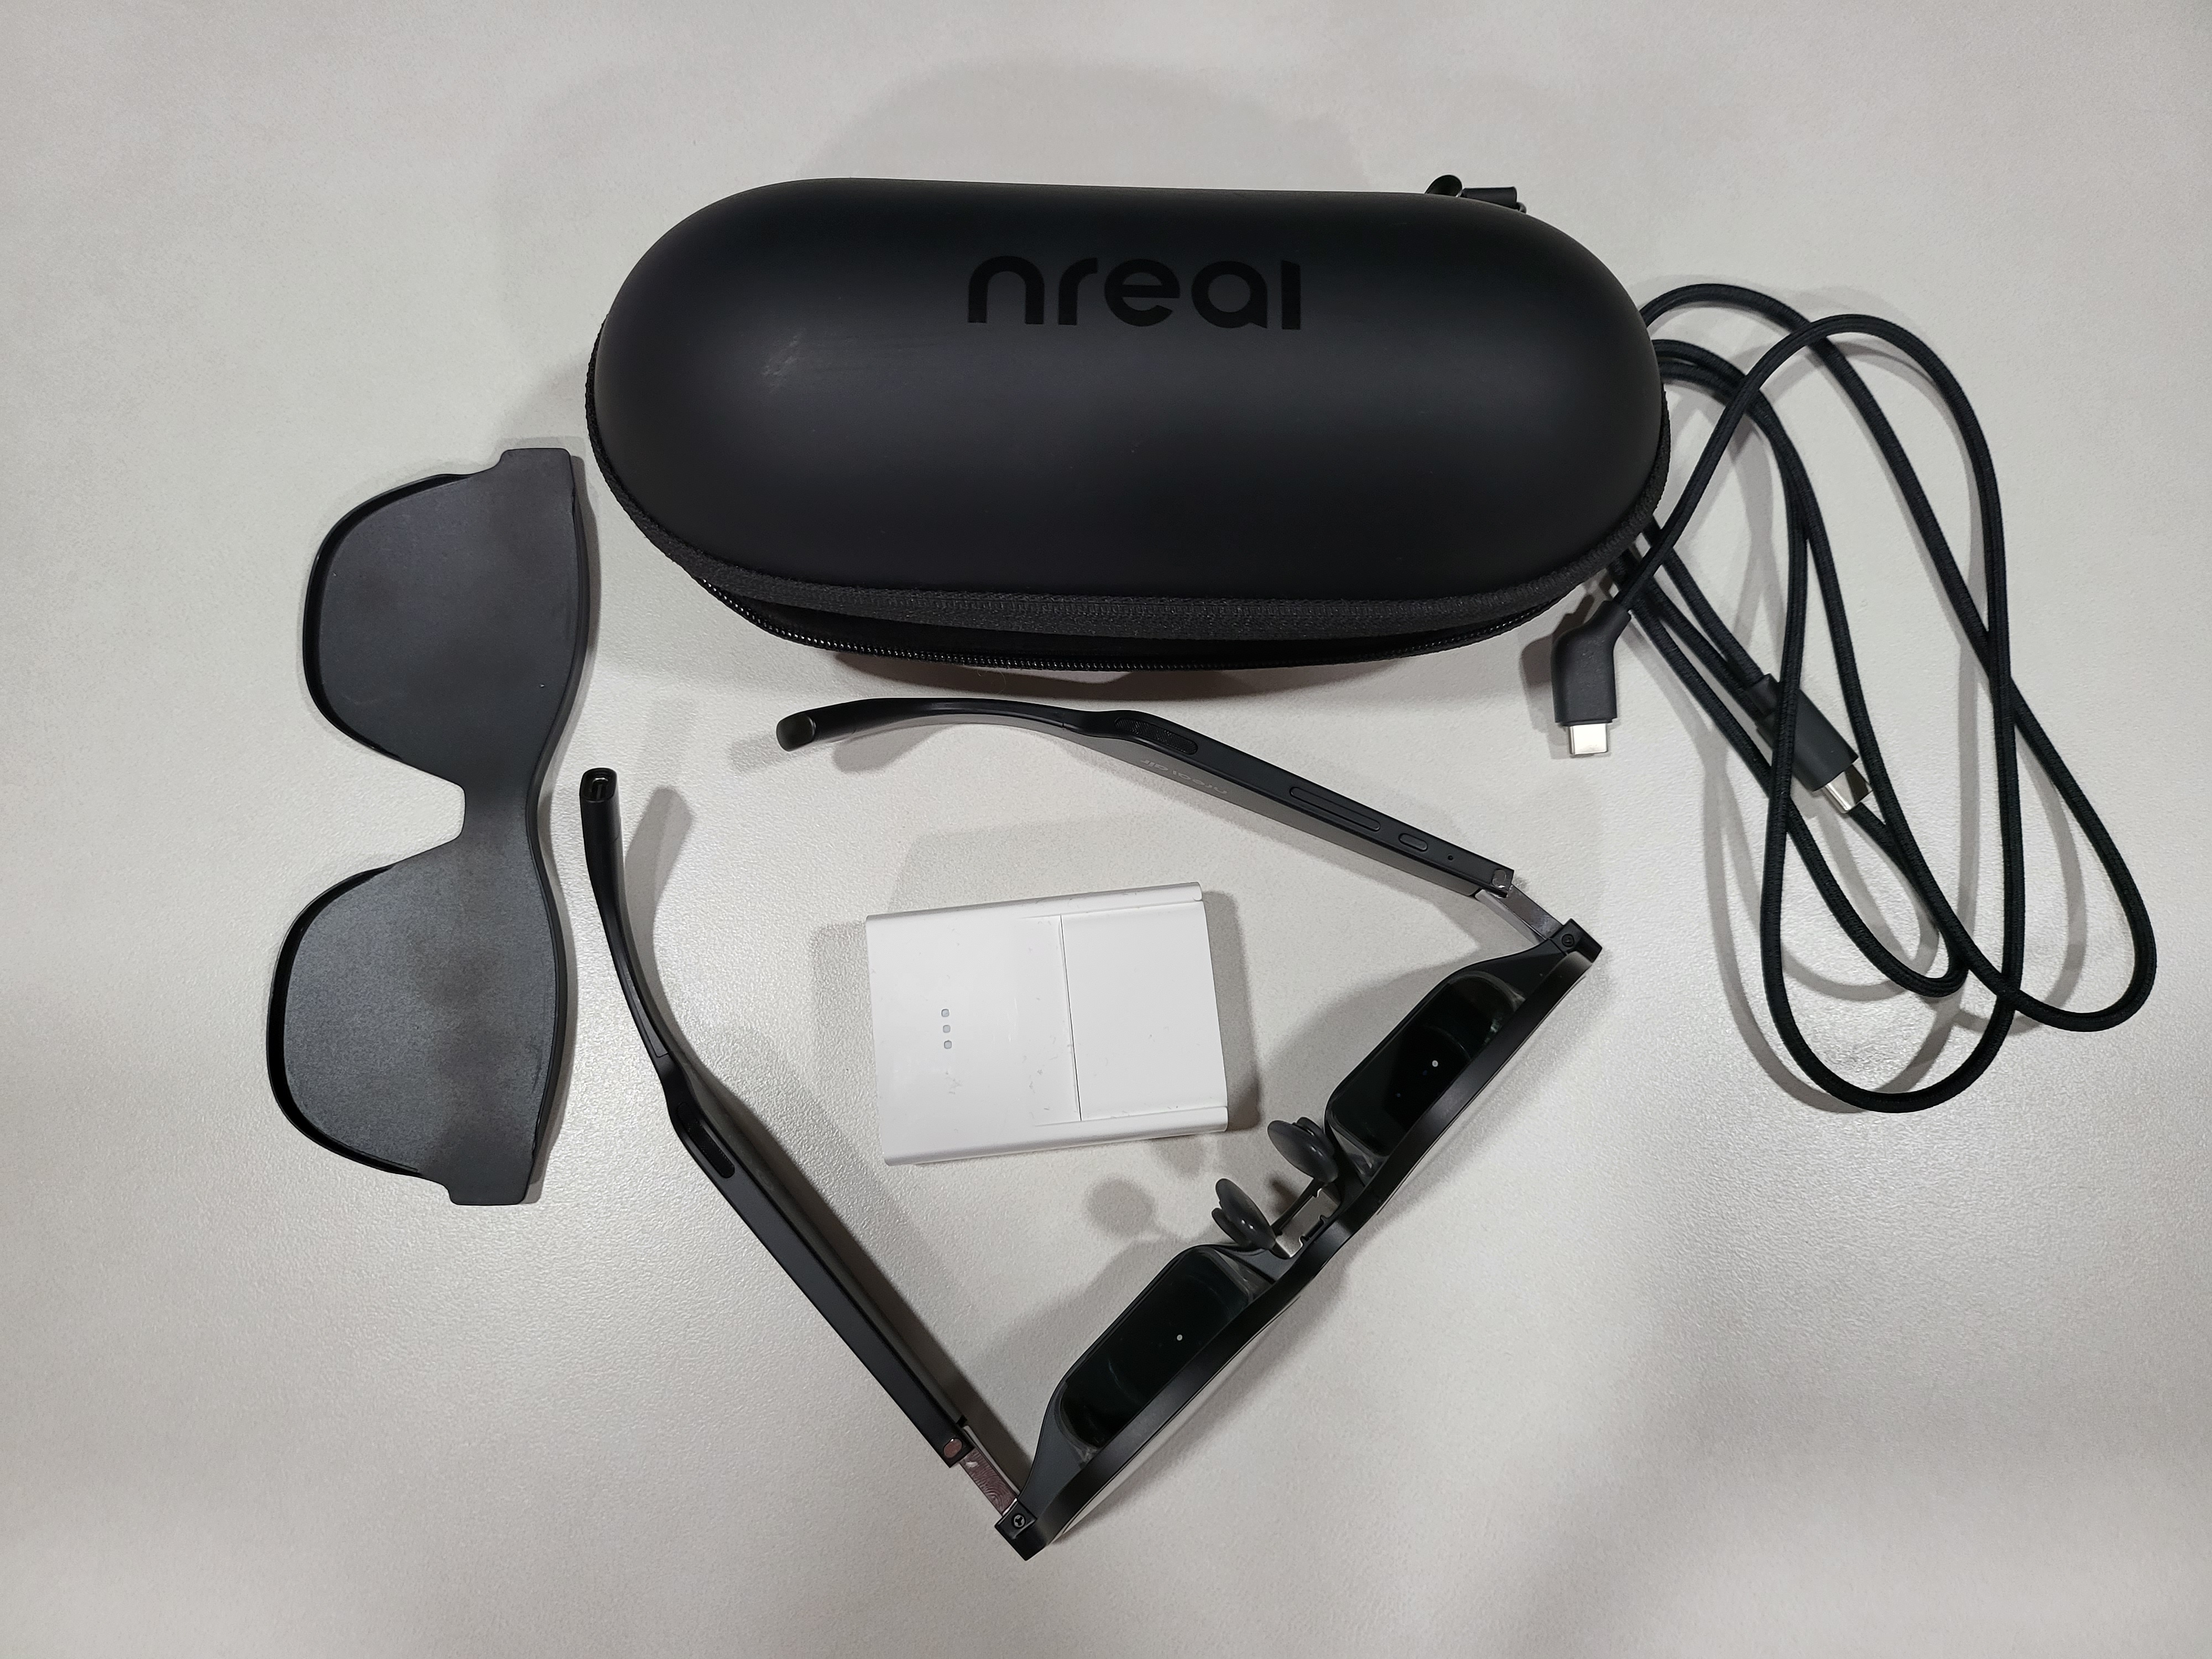 Xreal formerly Nreal Air Glasses Now Support  Frames Per